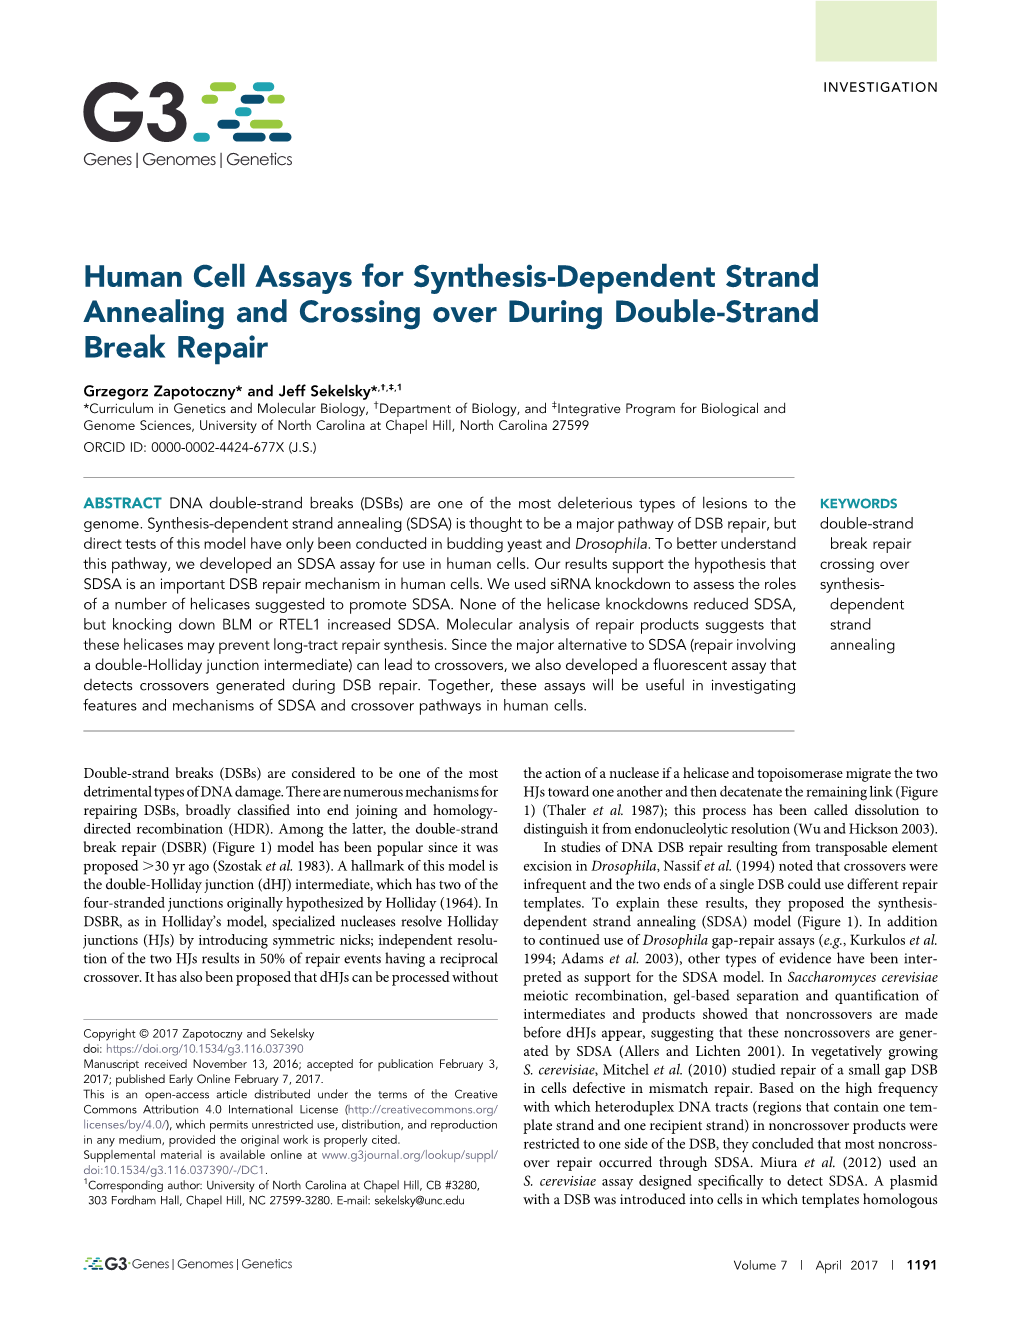 Human Cell Assays for Synthesis-Dependent Strand Annealing and Crossing Over During Double-Strand Break Repair